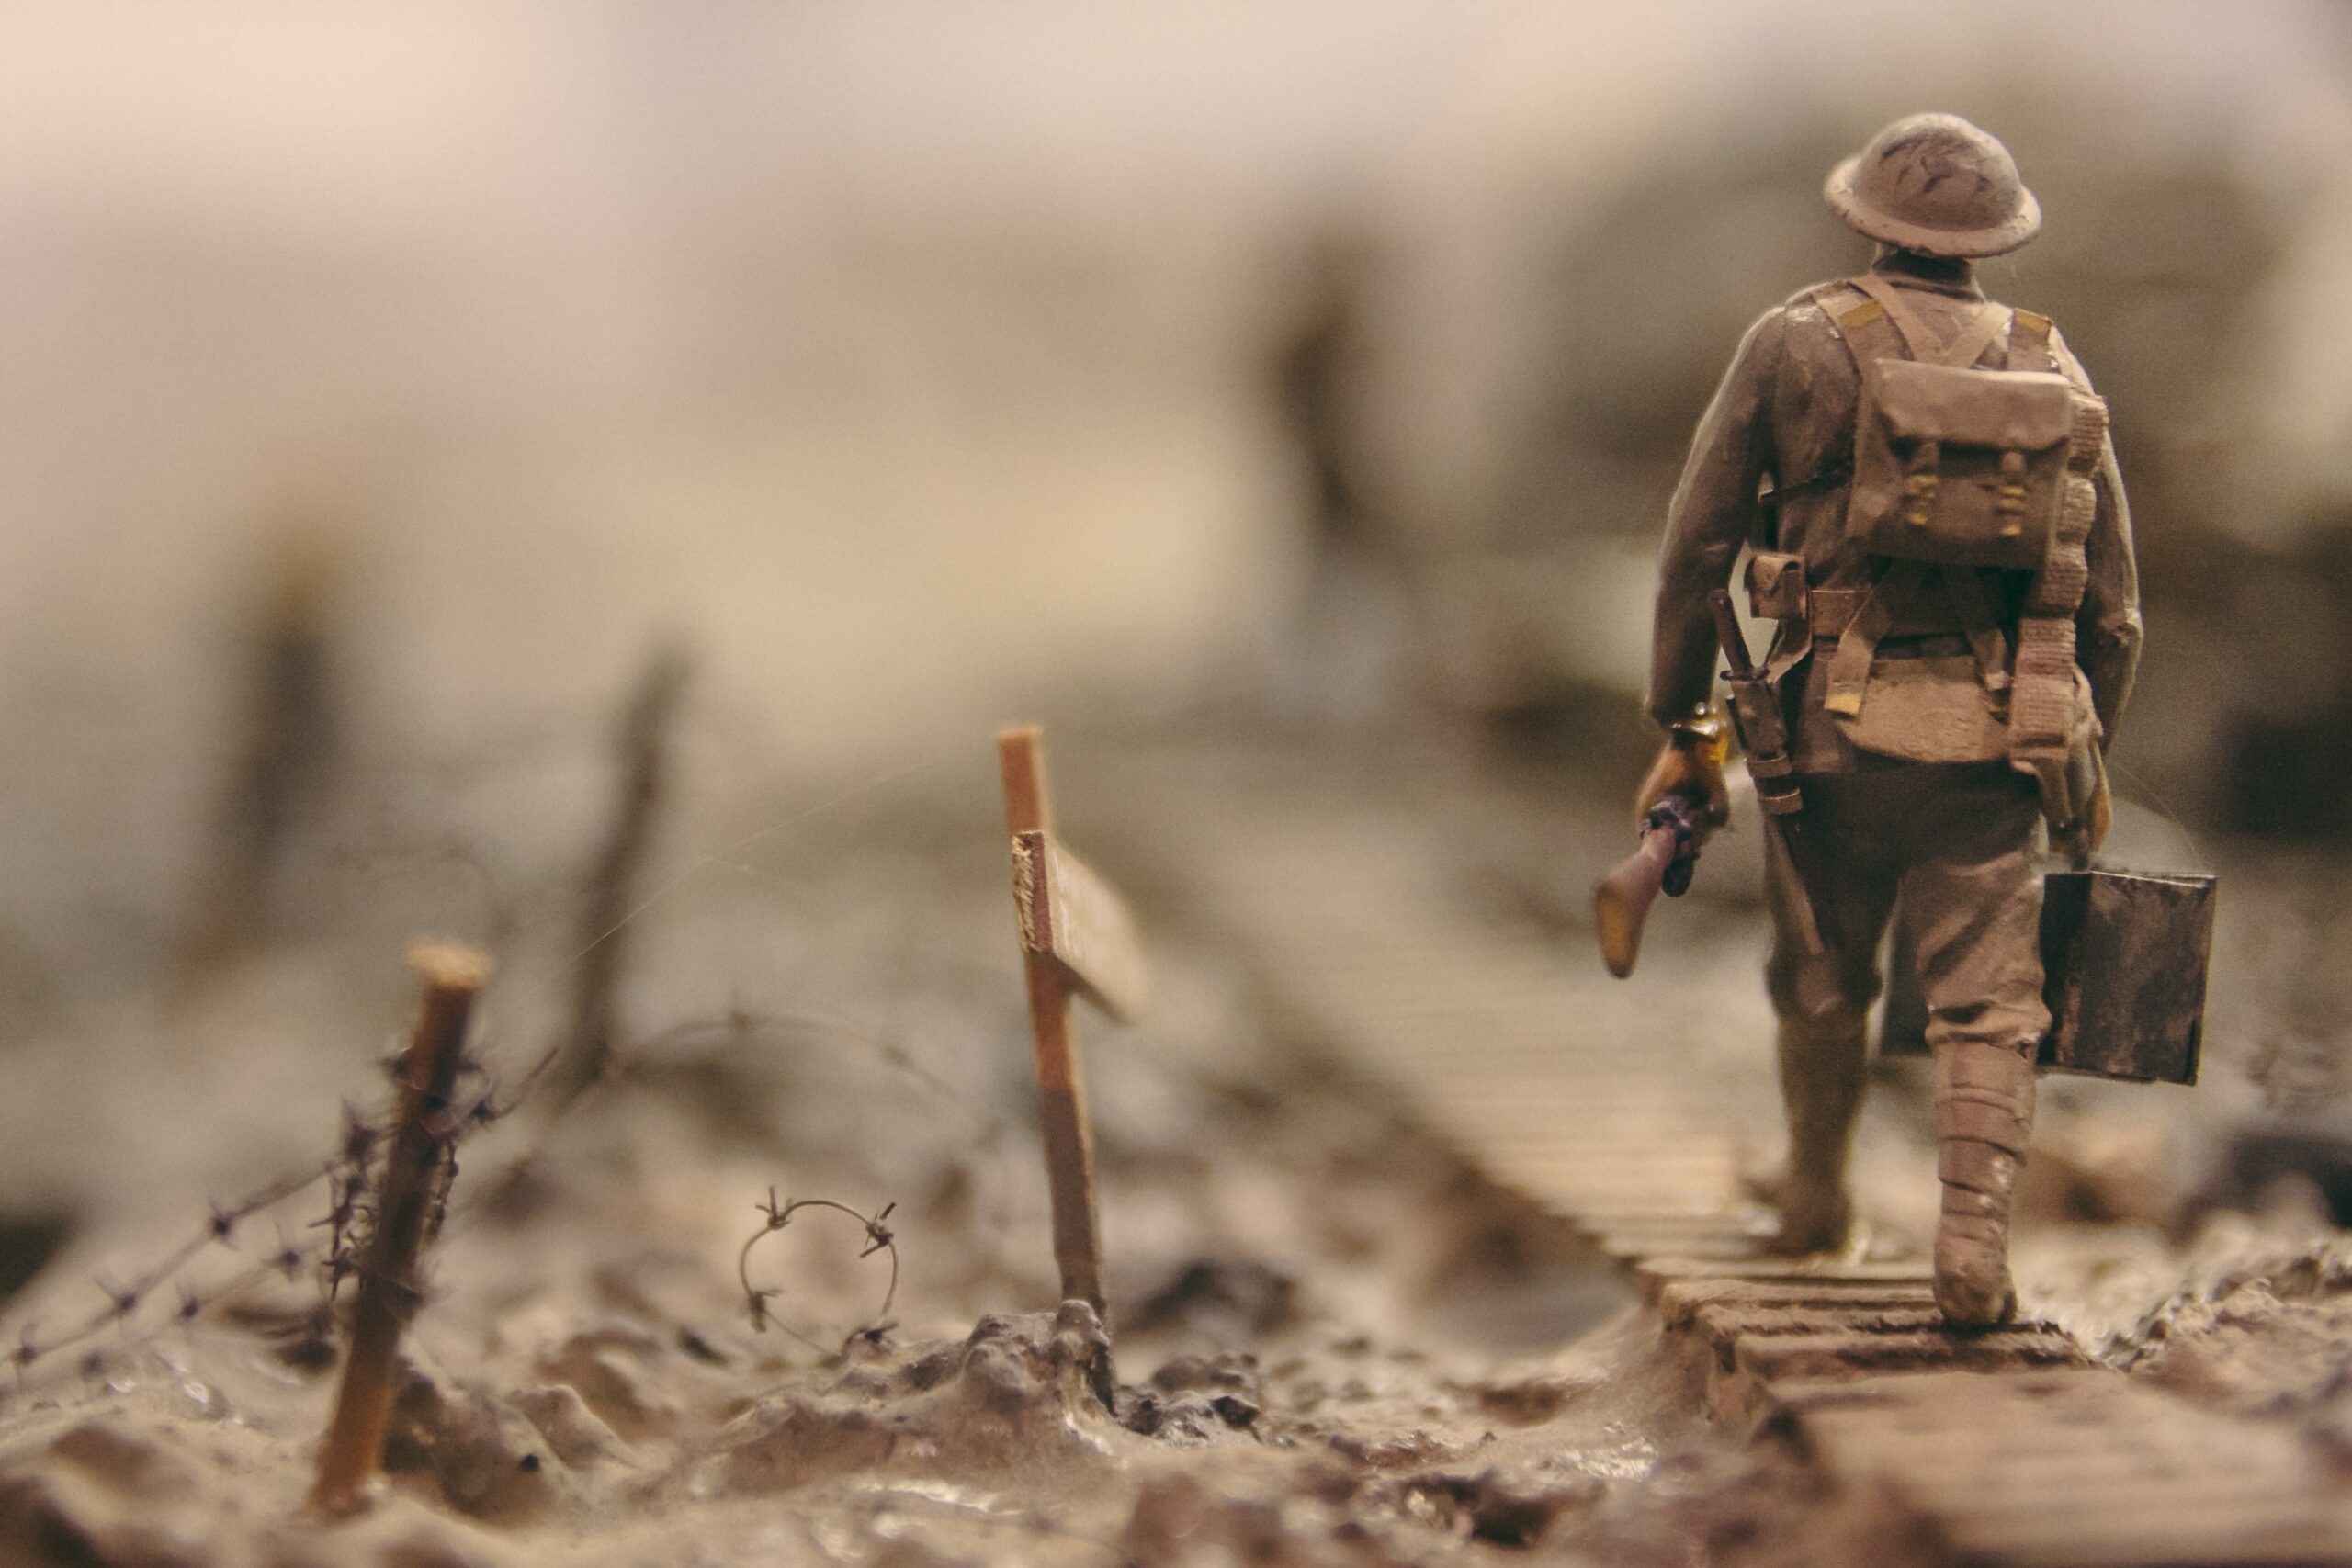 soldier walking on wooden pathway surrounded with barbwire selective focus photography